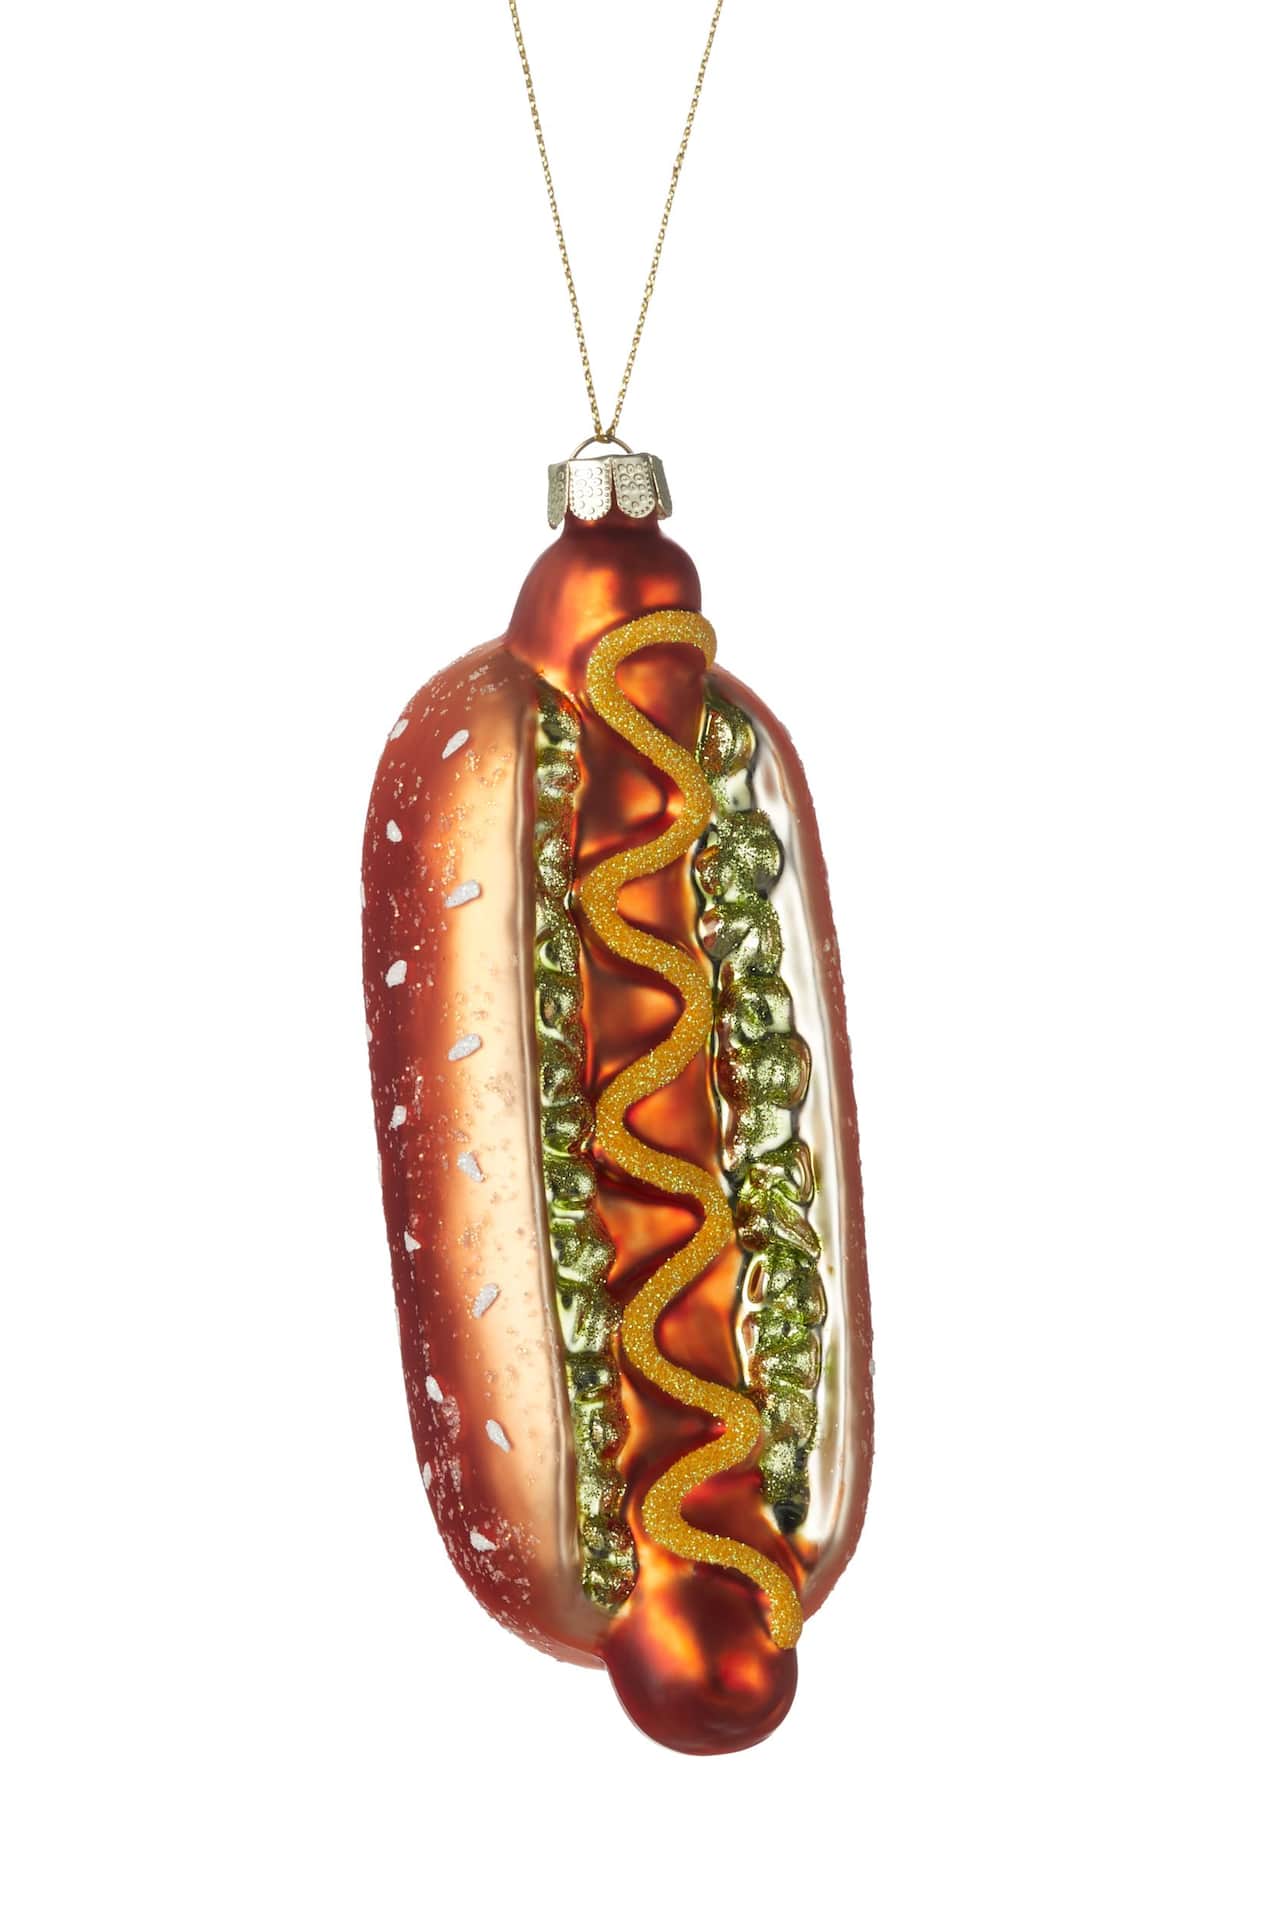 CANVAS Brights Collection Decoration Hotdog Christmas Ornament, 6-in ...